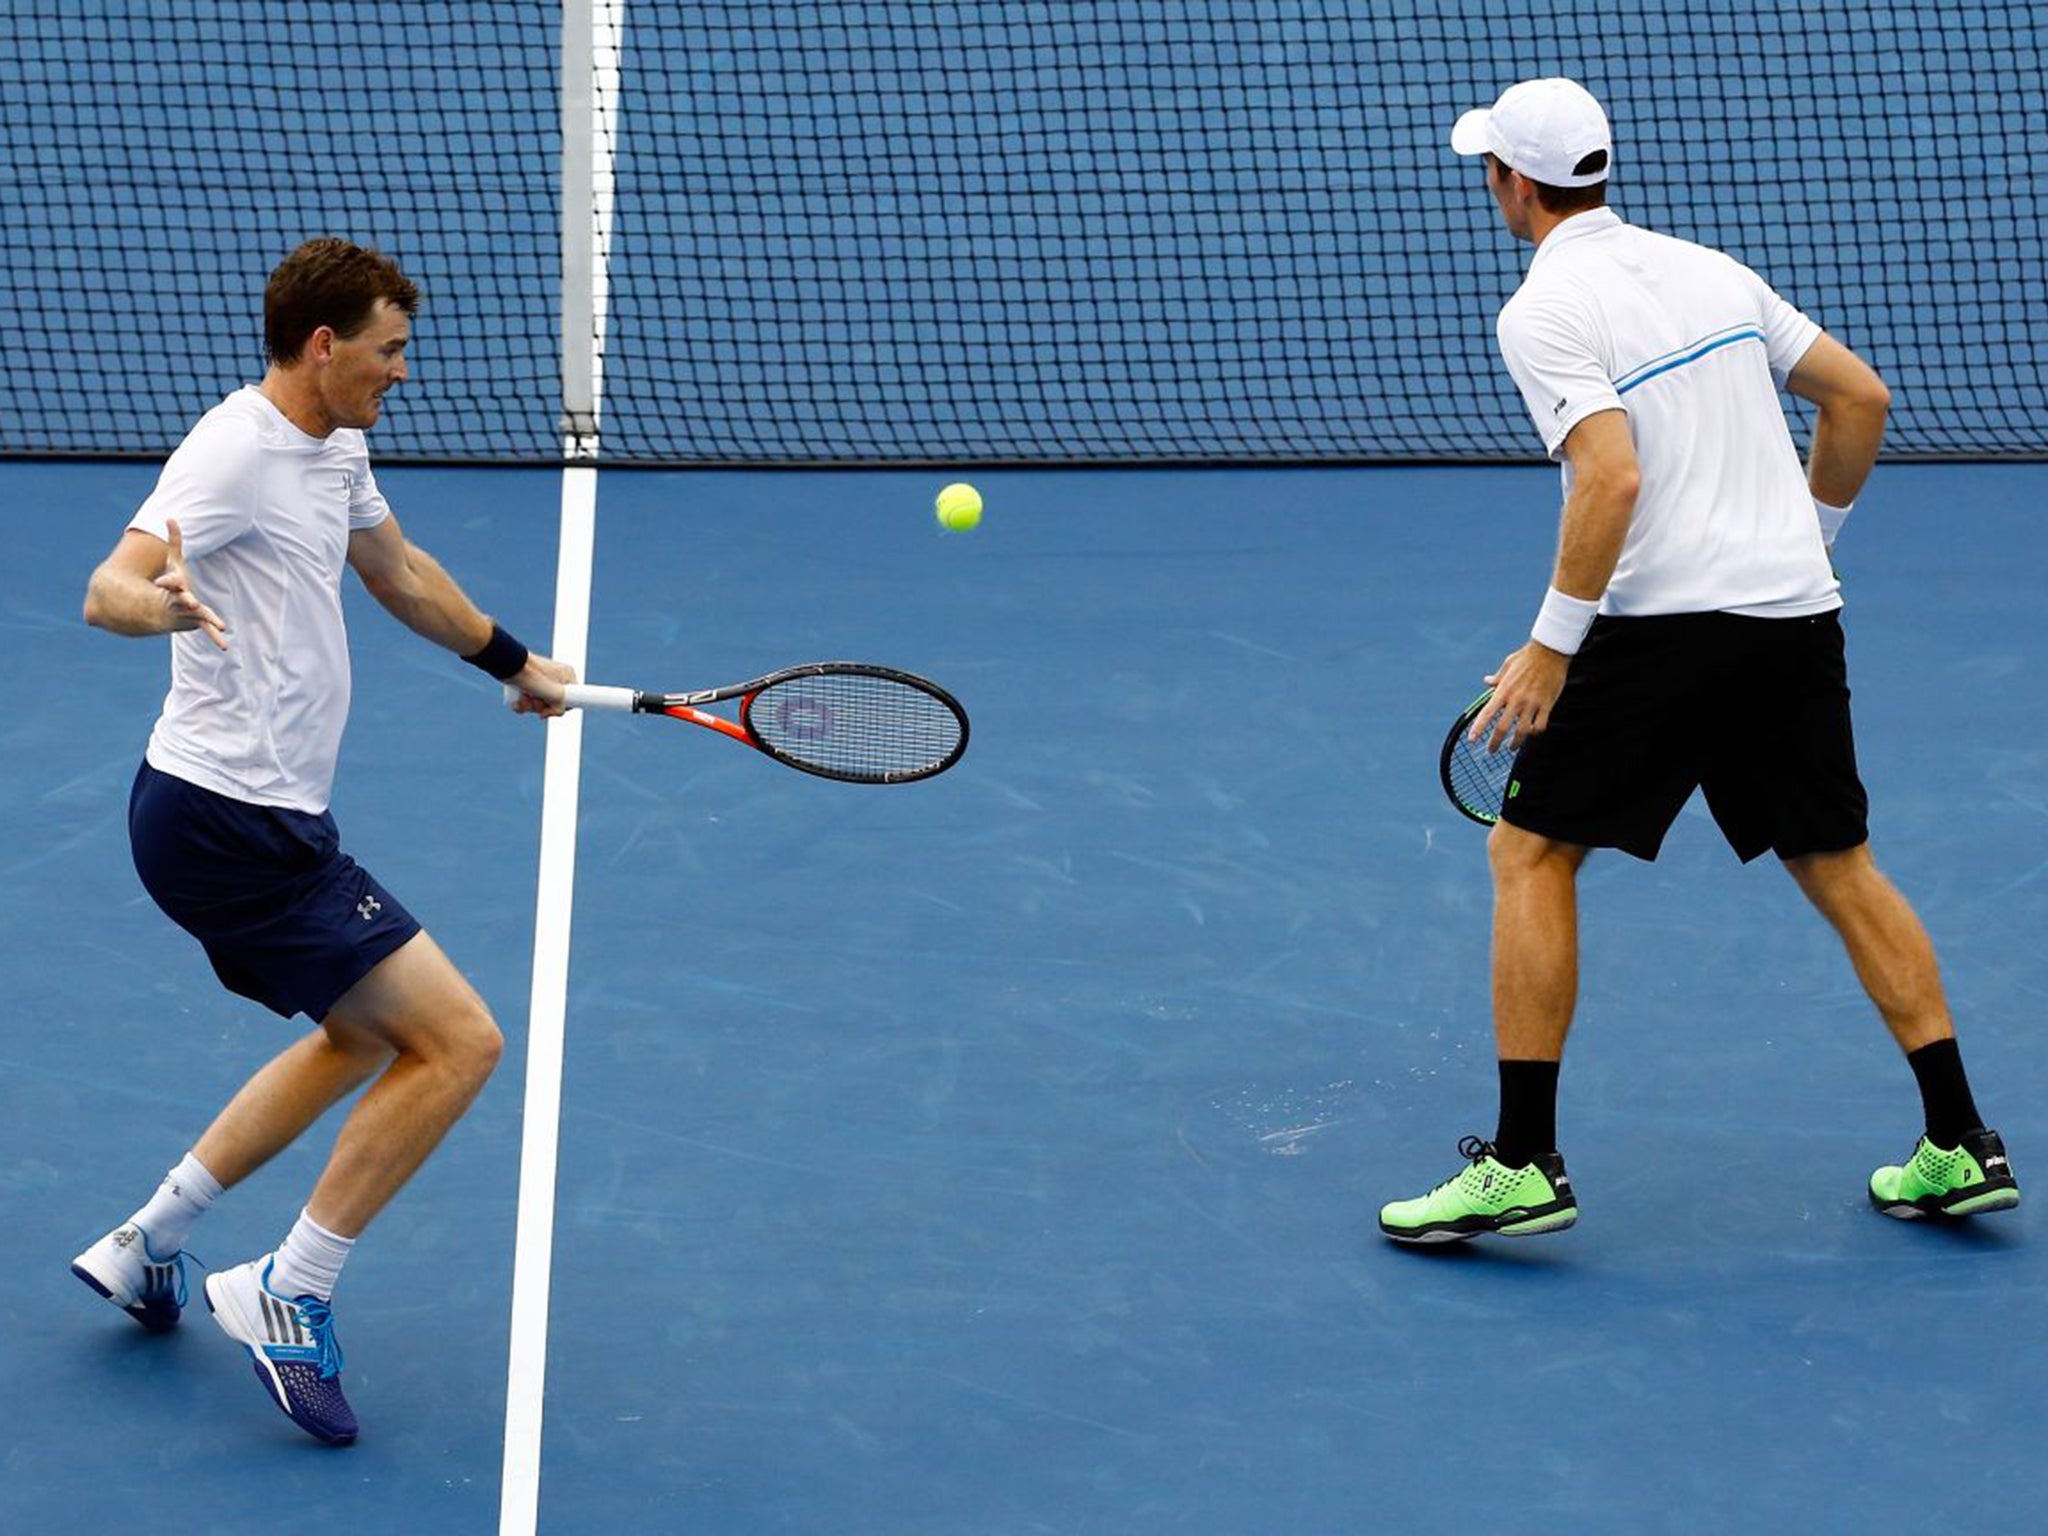 Jamie Murray unleashes a backhand during his victory with John Peers in the men’s doubles semi-final